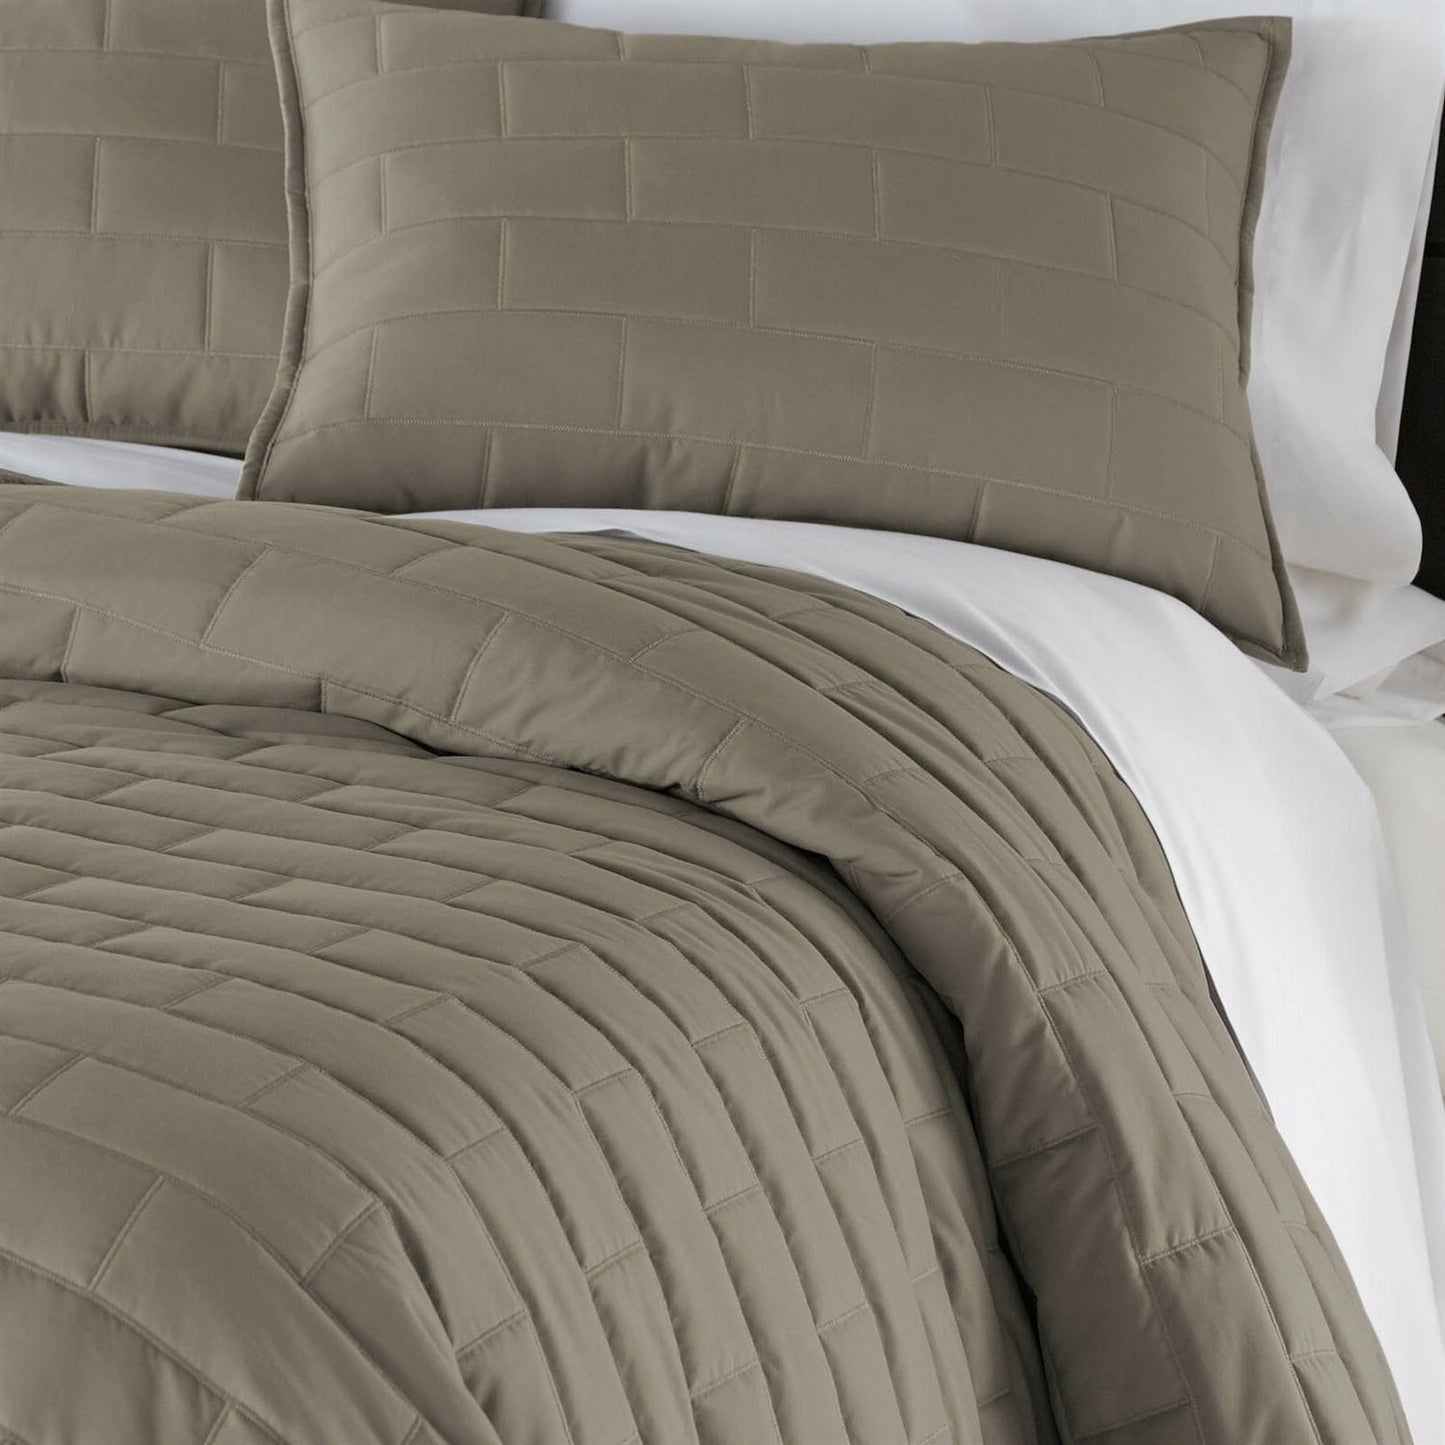 Bedroom > Comforters And Sets - Full/Queen Modern Brick Stitch Microfiber Reversible 3 Piece Comforter Set In Taupe